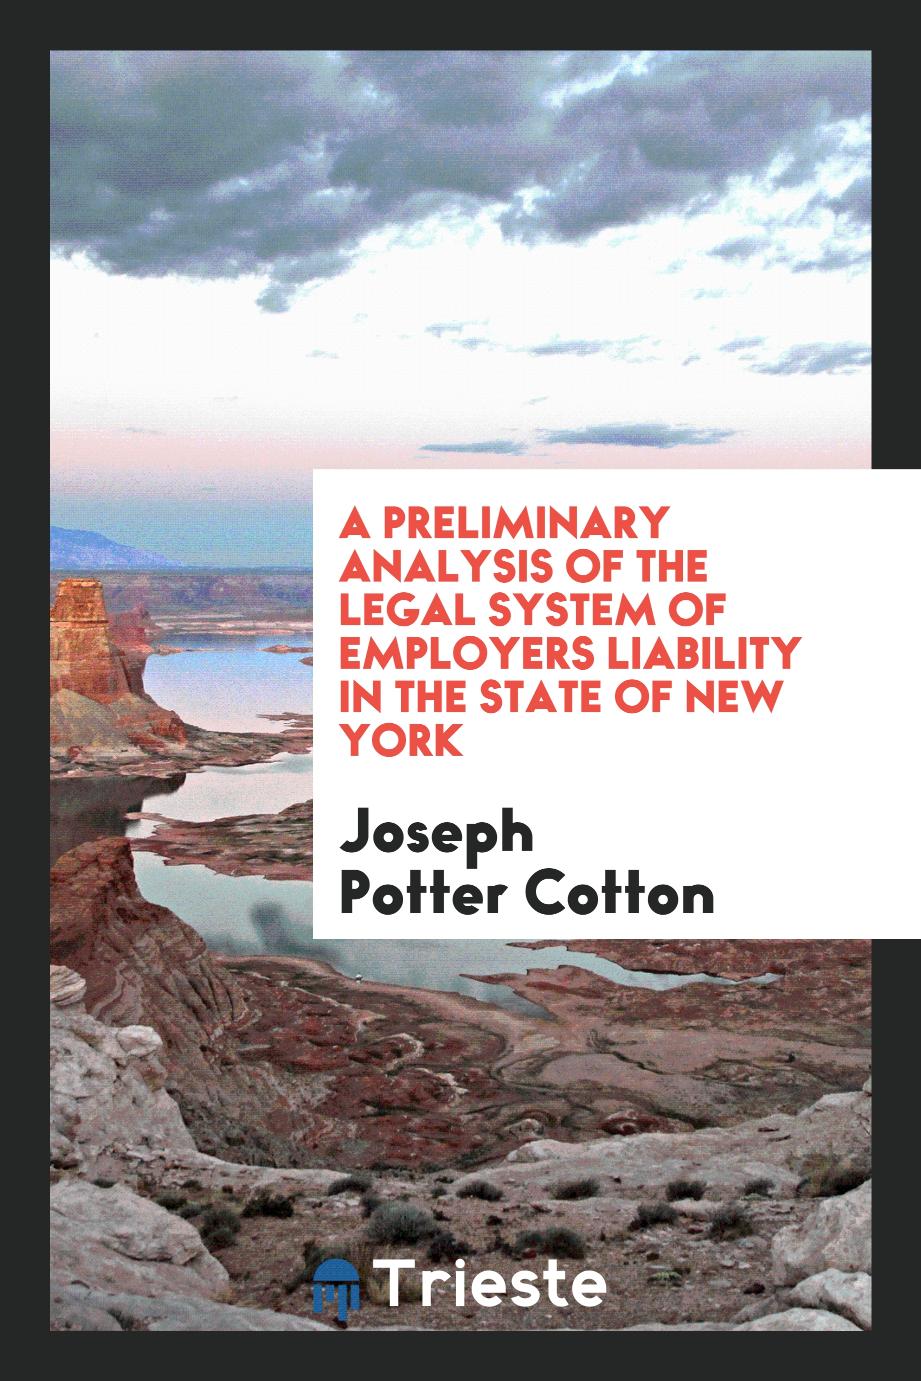 A preliminary analysis of the legal system of employers liability in the state of New York